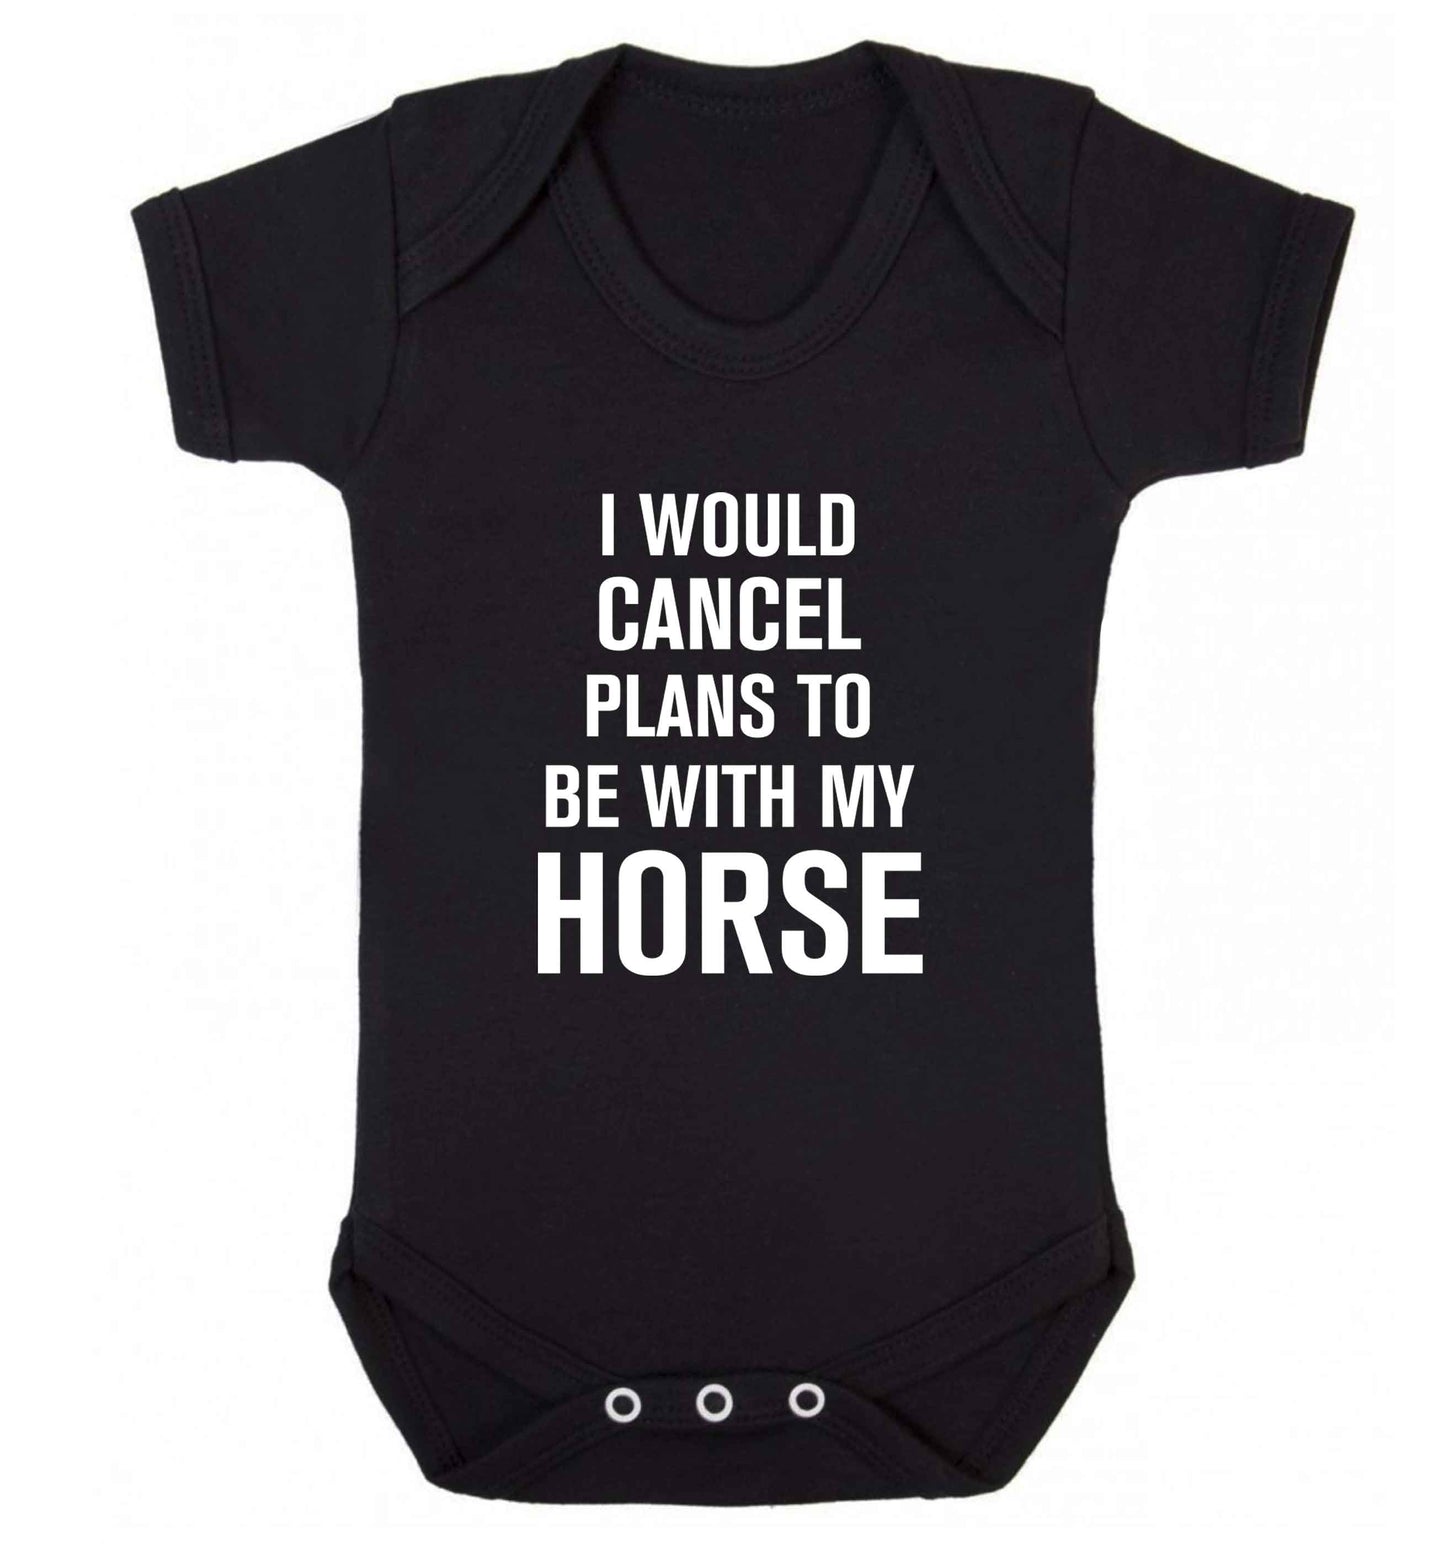 I will cancel plans to be with my horse baby vest black 18-24 months